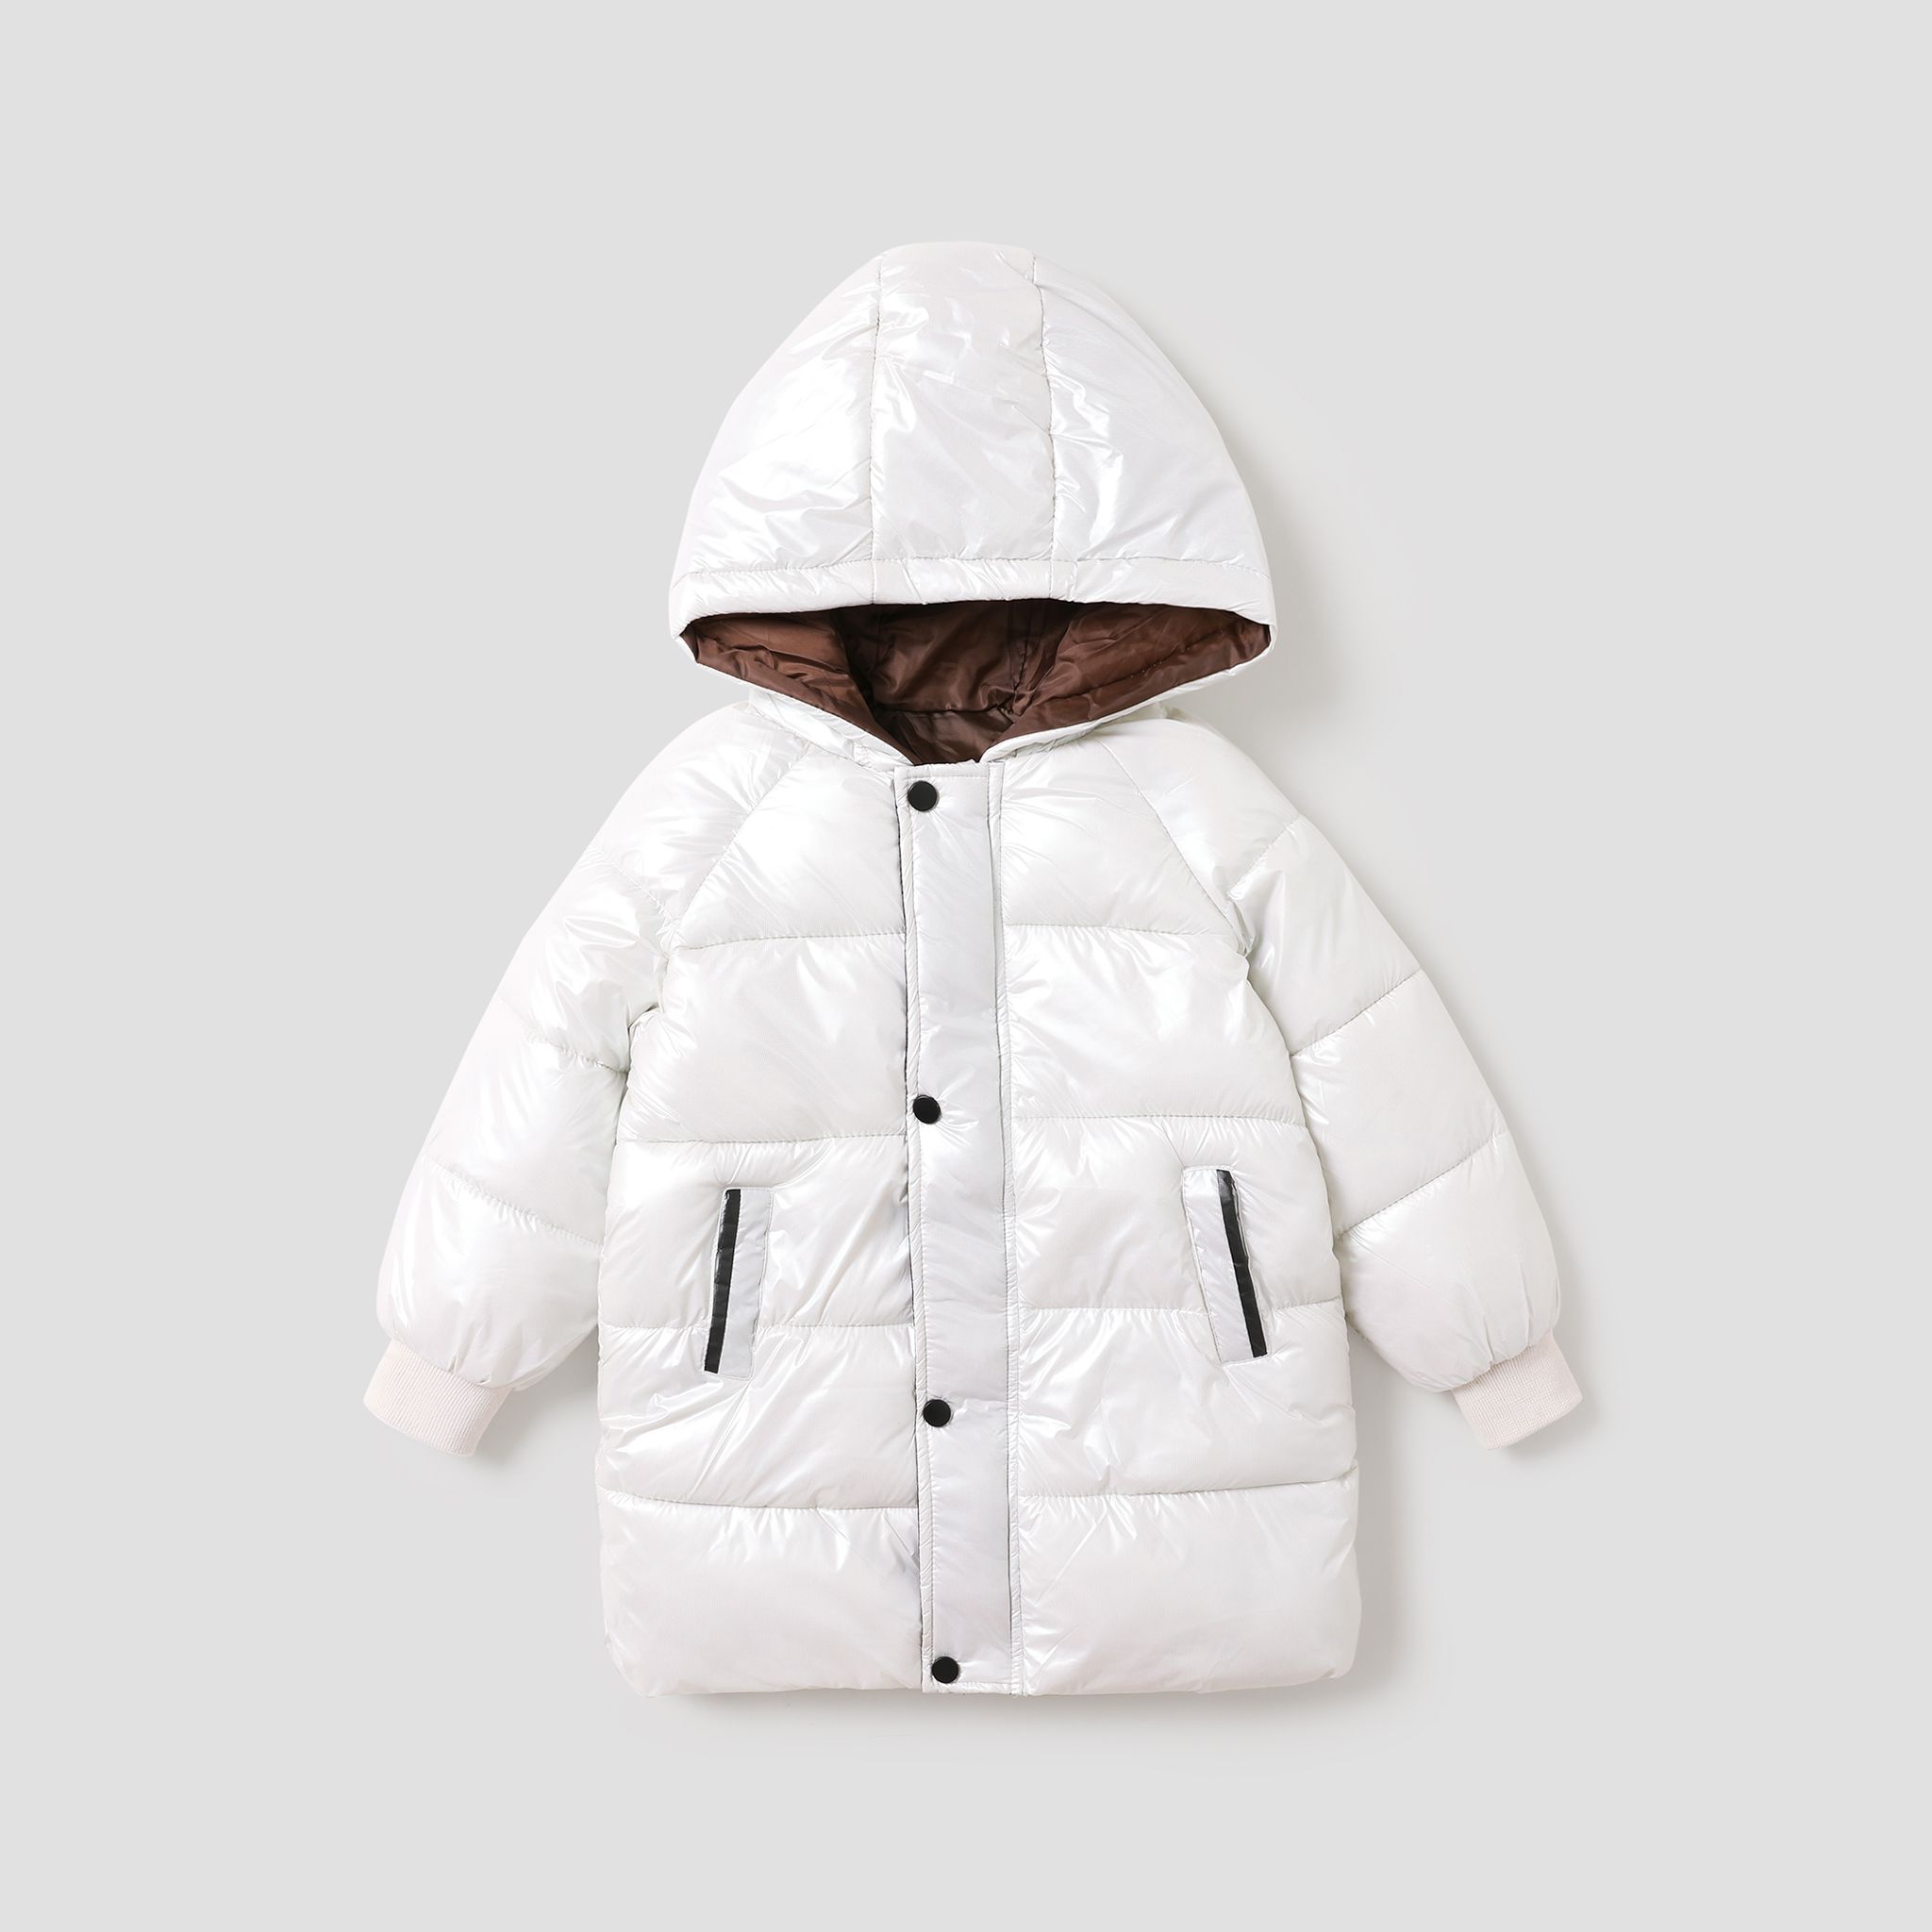 Toddler/Kid Girl/Boy Solid Color Avant-garde Button Hooded Cotton Coat